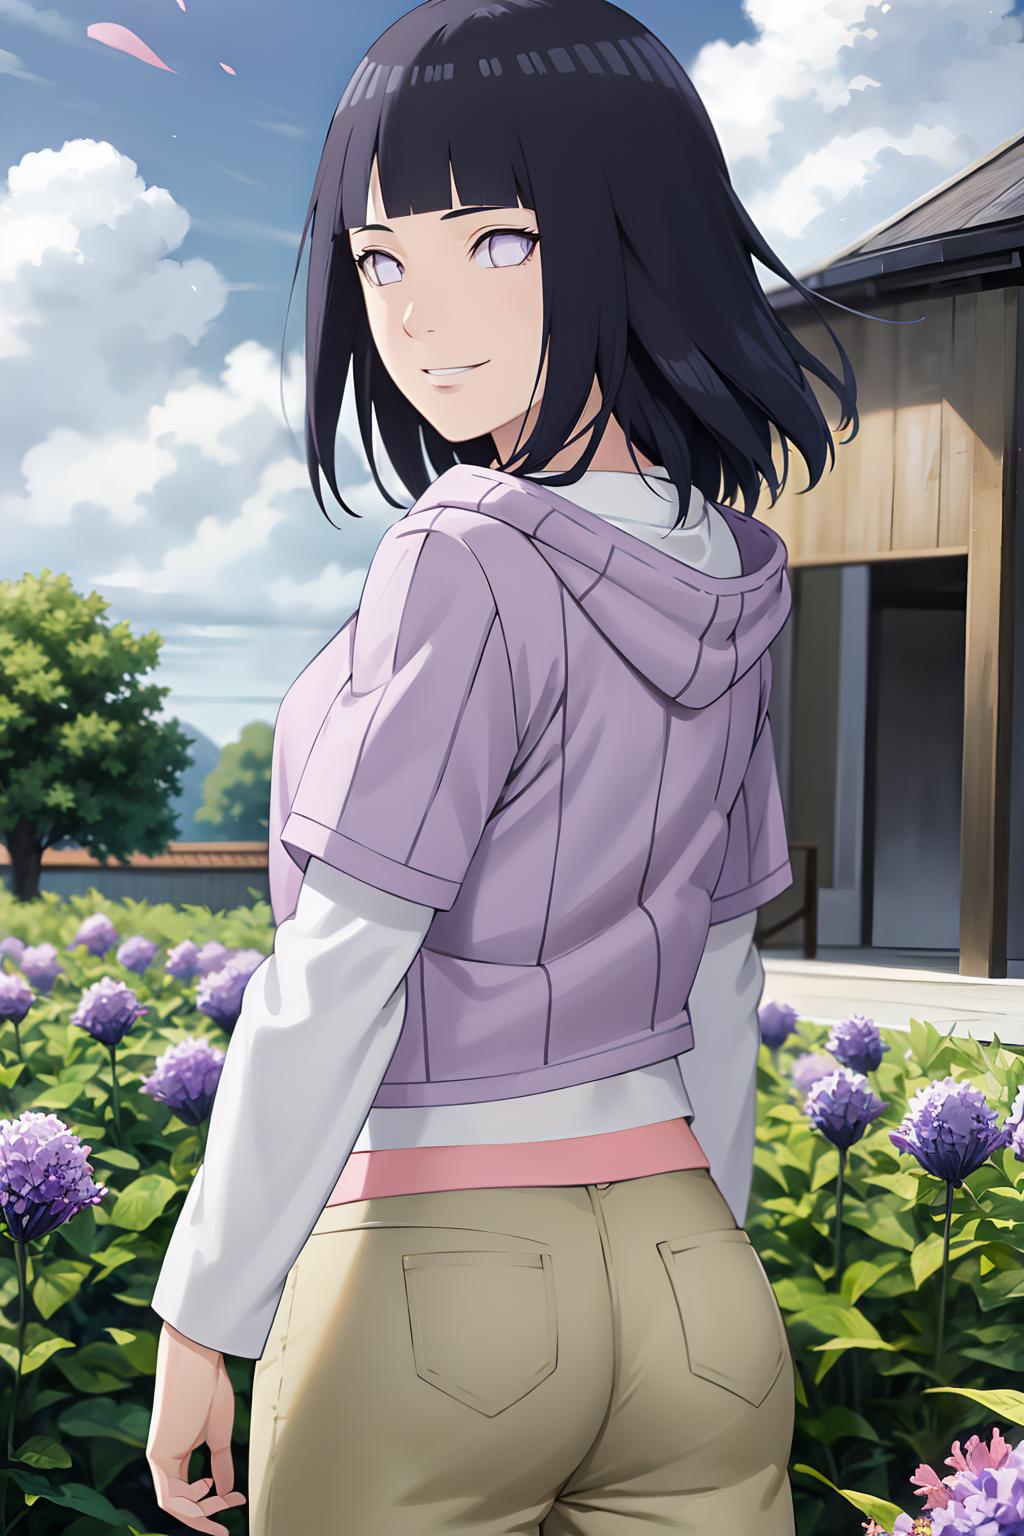 A woman wearing a pink sweater and white shirt posing in a garden.